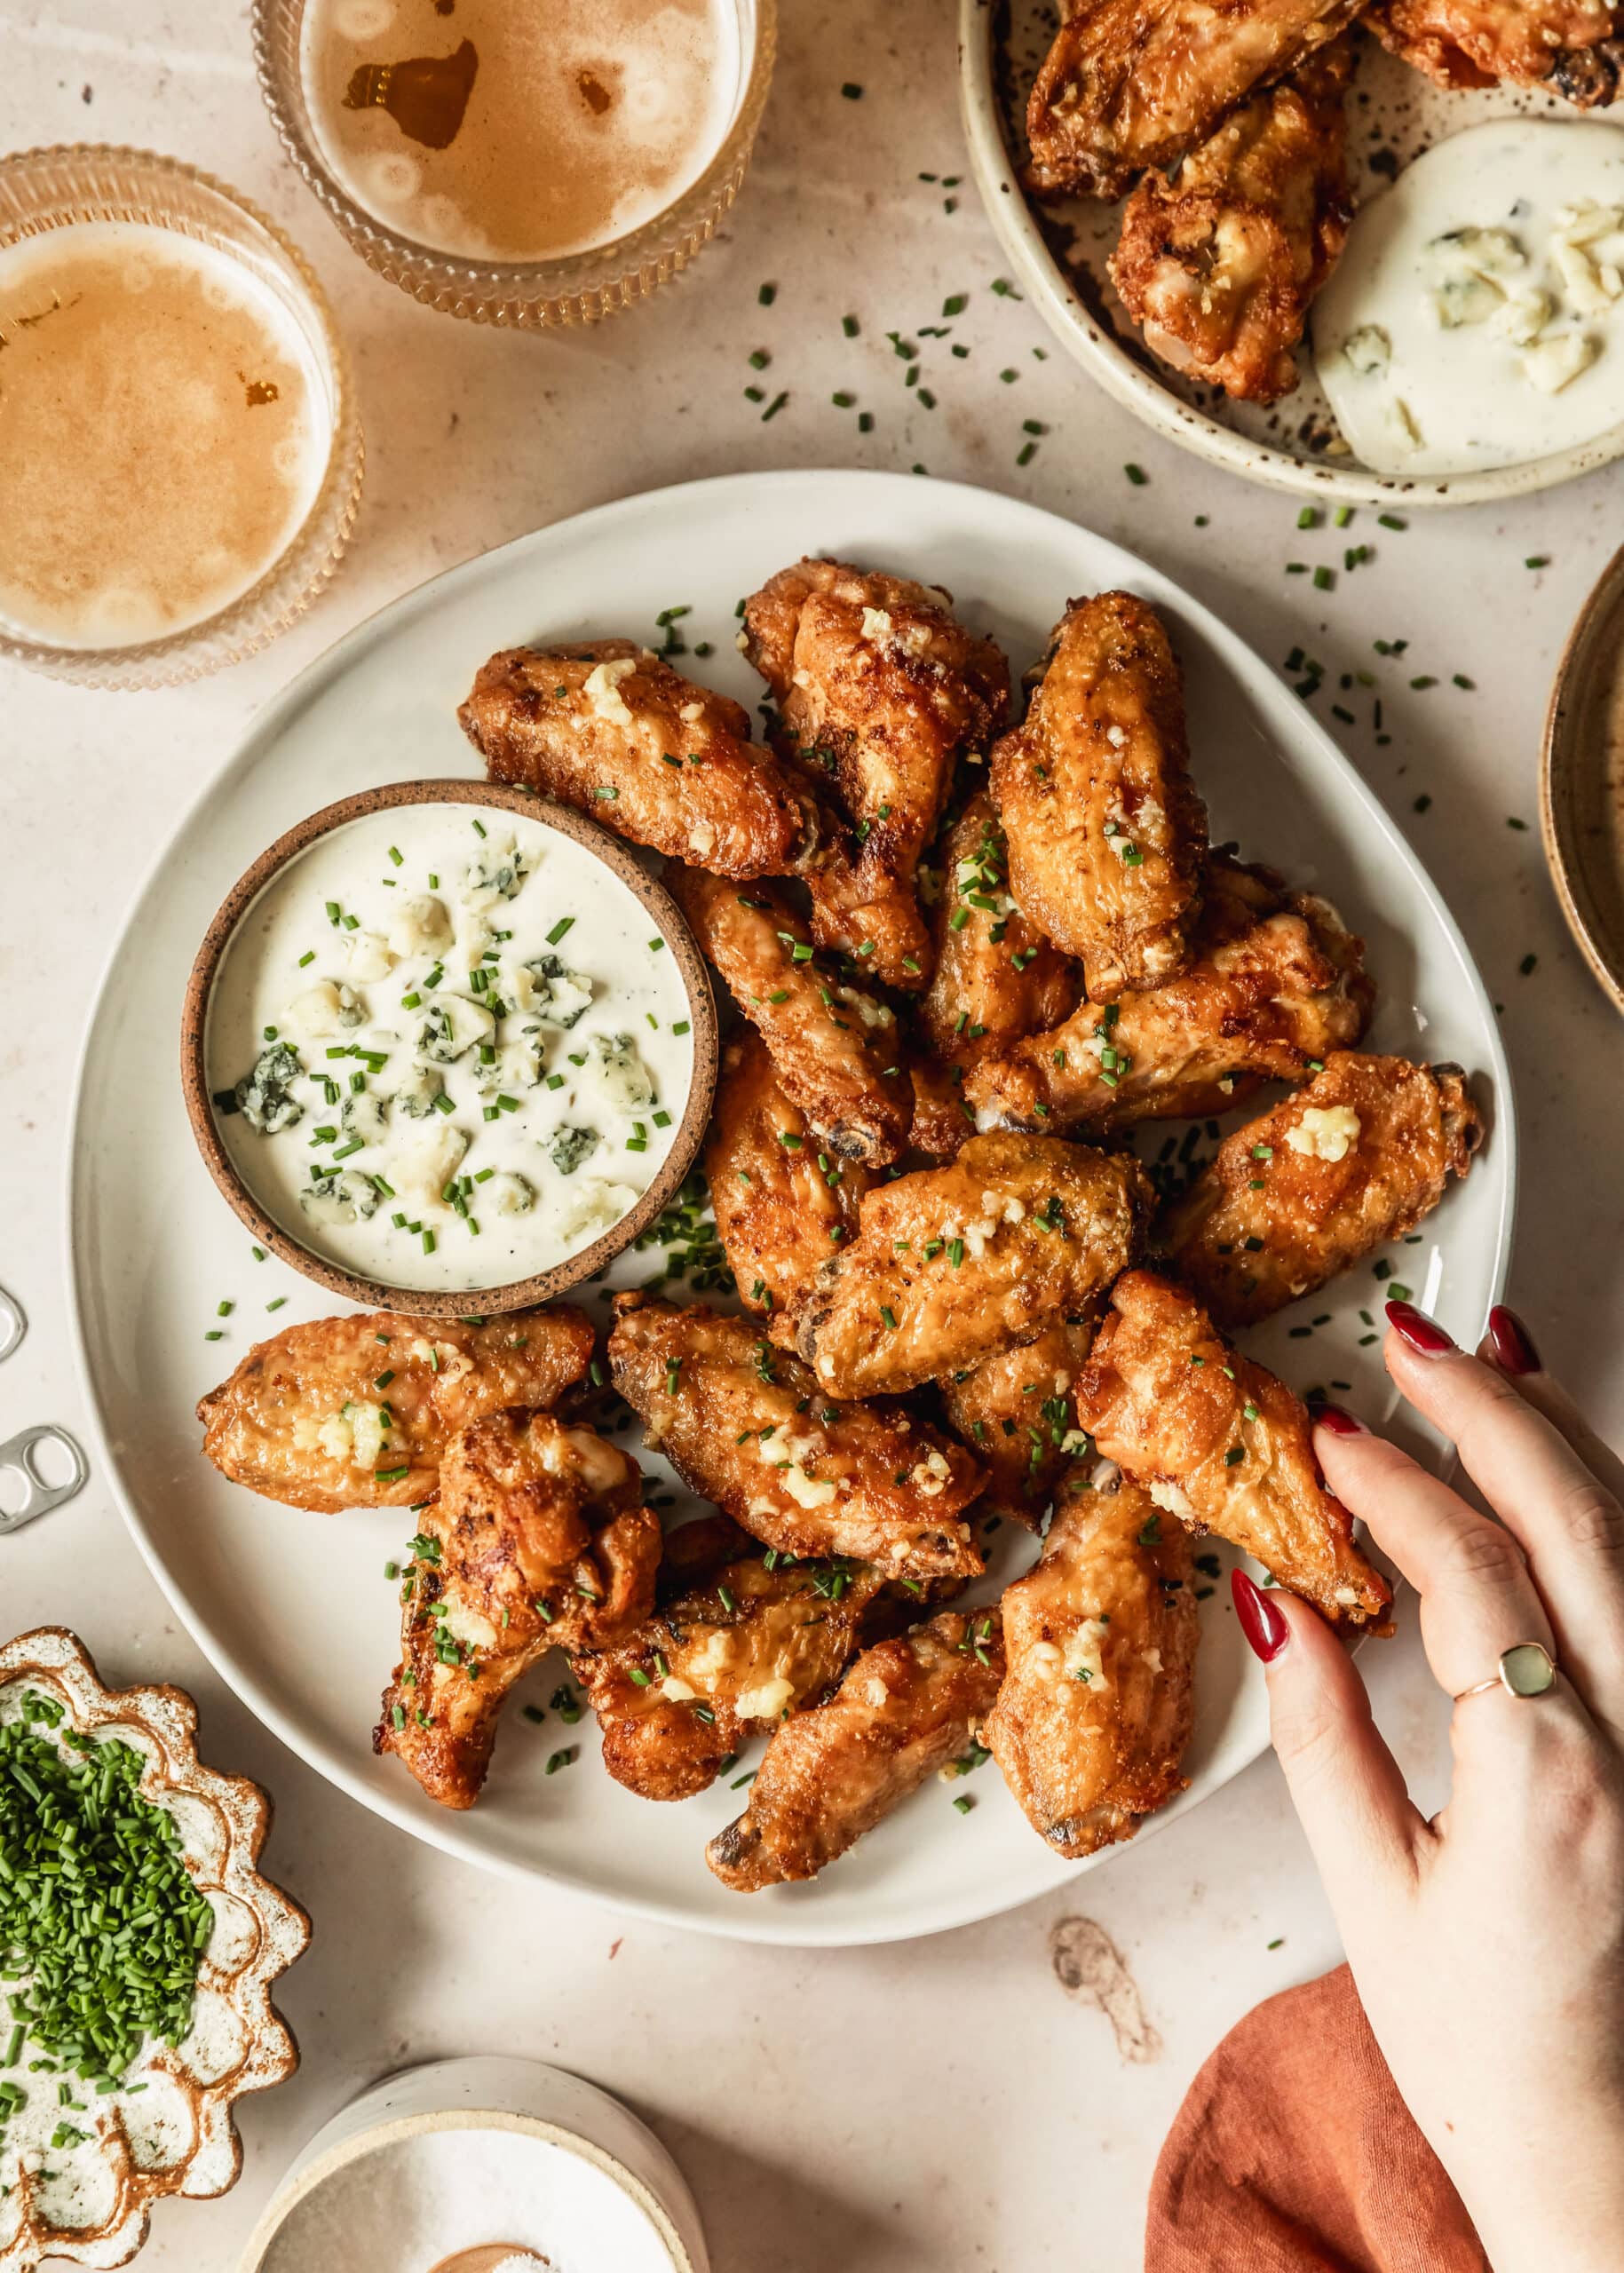 A hand reaching for a garlic butter chicken wing on a white plate next to a brown bowl of ranch, a white bowl of chives, glasses of beer, and an orange linen on a beige counter.